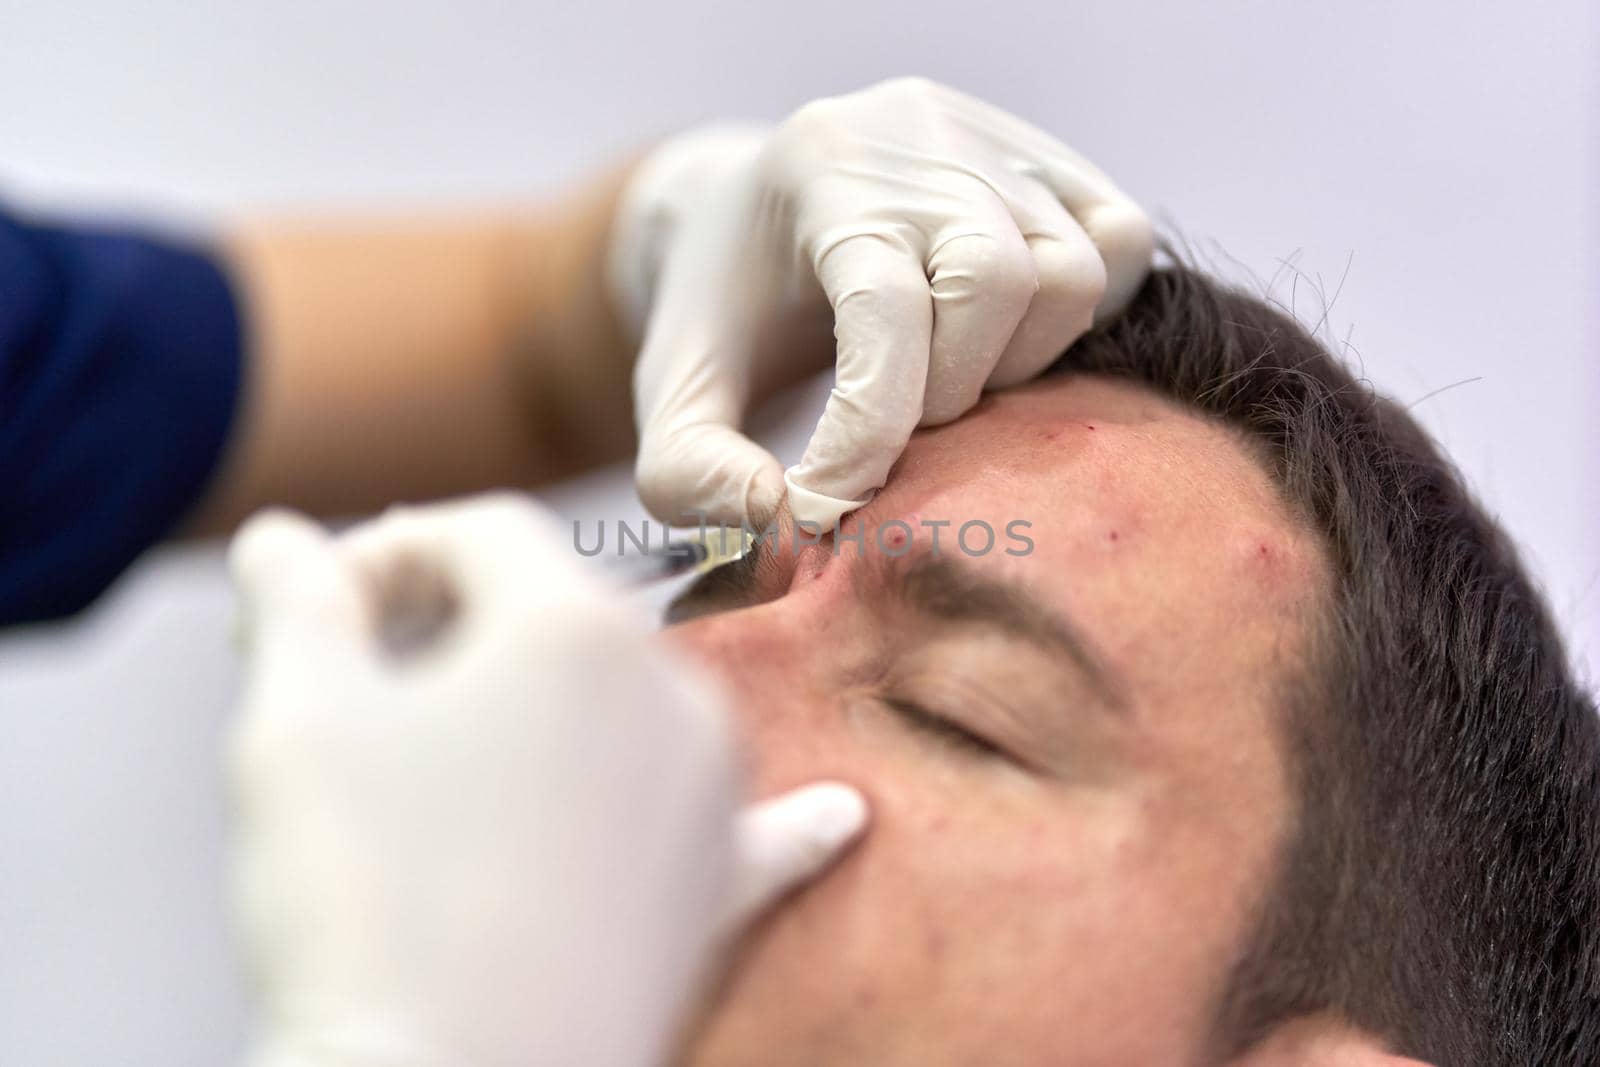 Doctor pinching a piece of skin where he injects botox for a patient's facial rejuvenation treatment